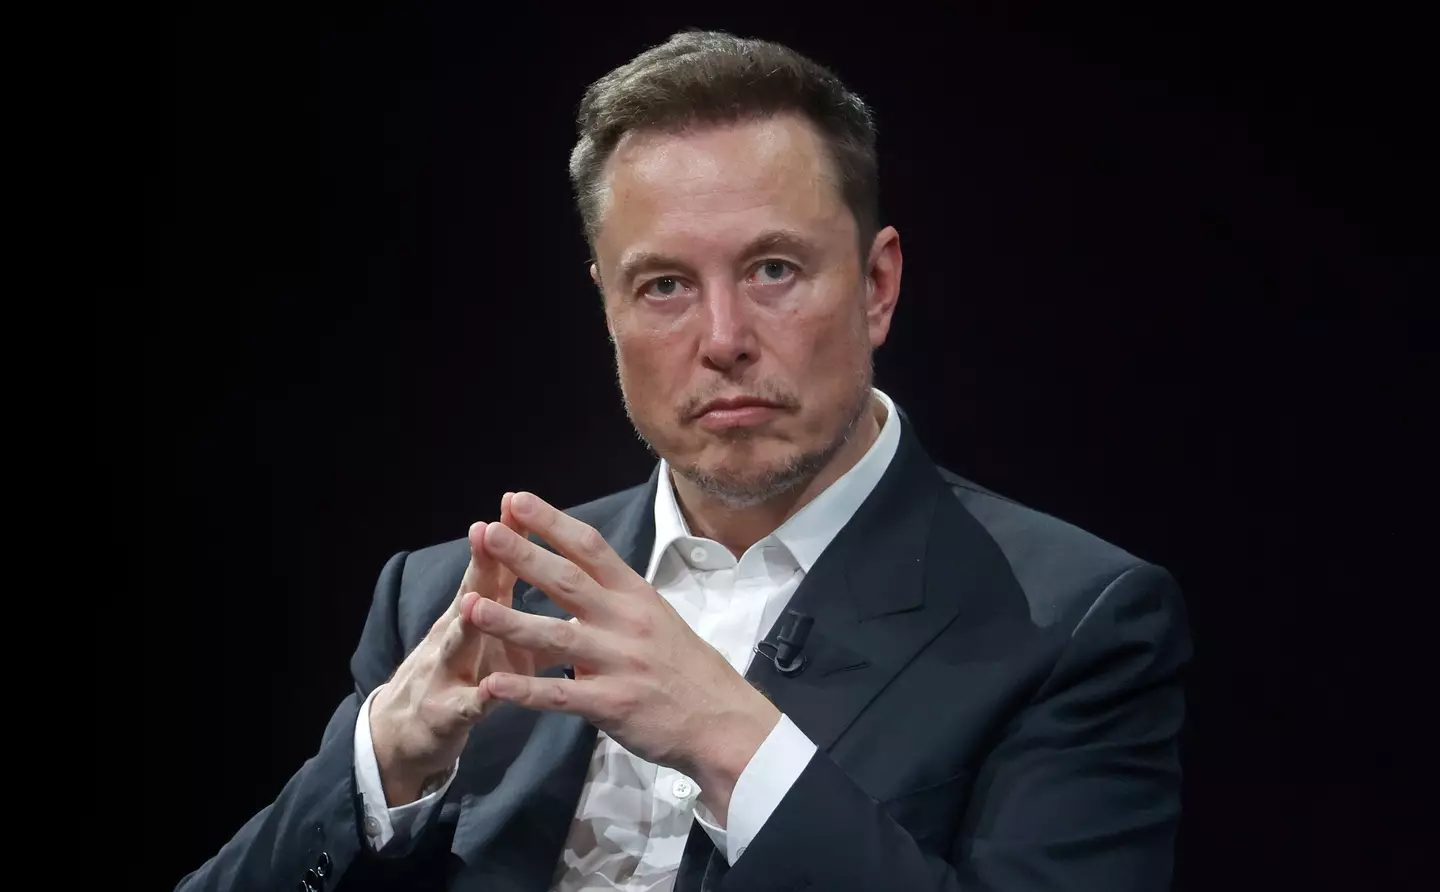 Twitter, headed by Elon Musk, has threatened a lawsuit, according to a report.